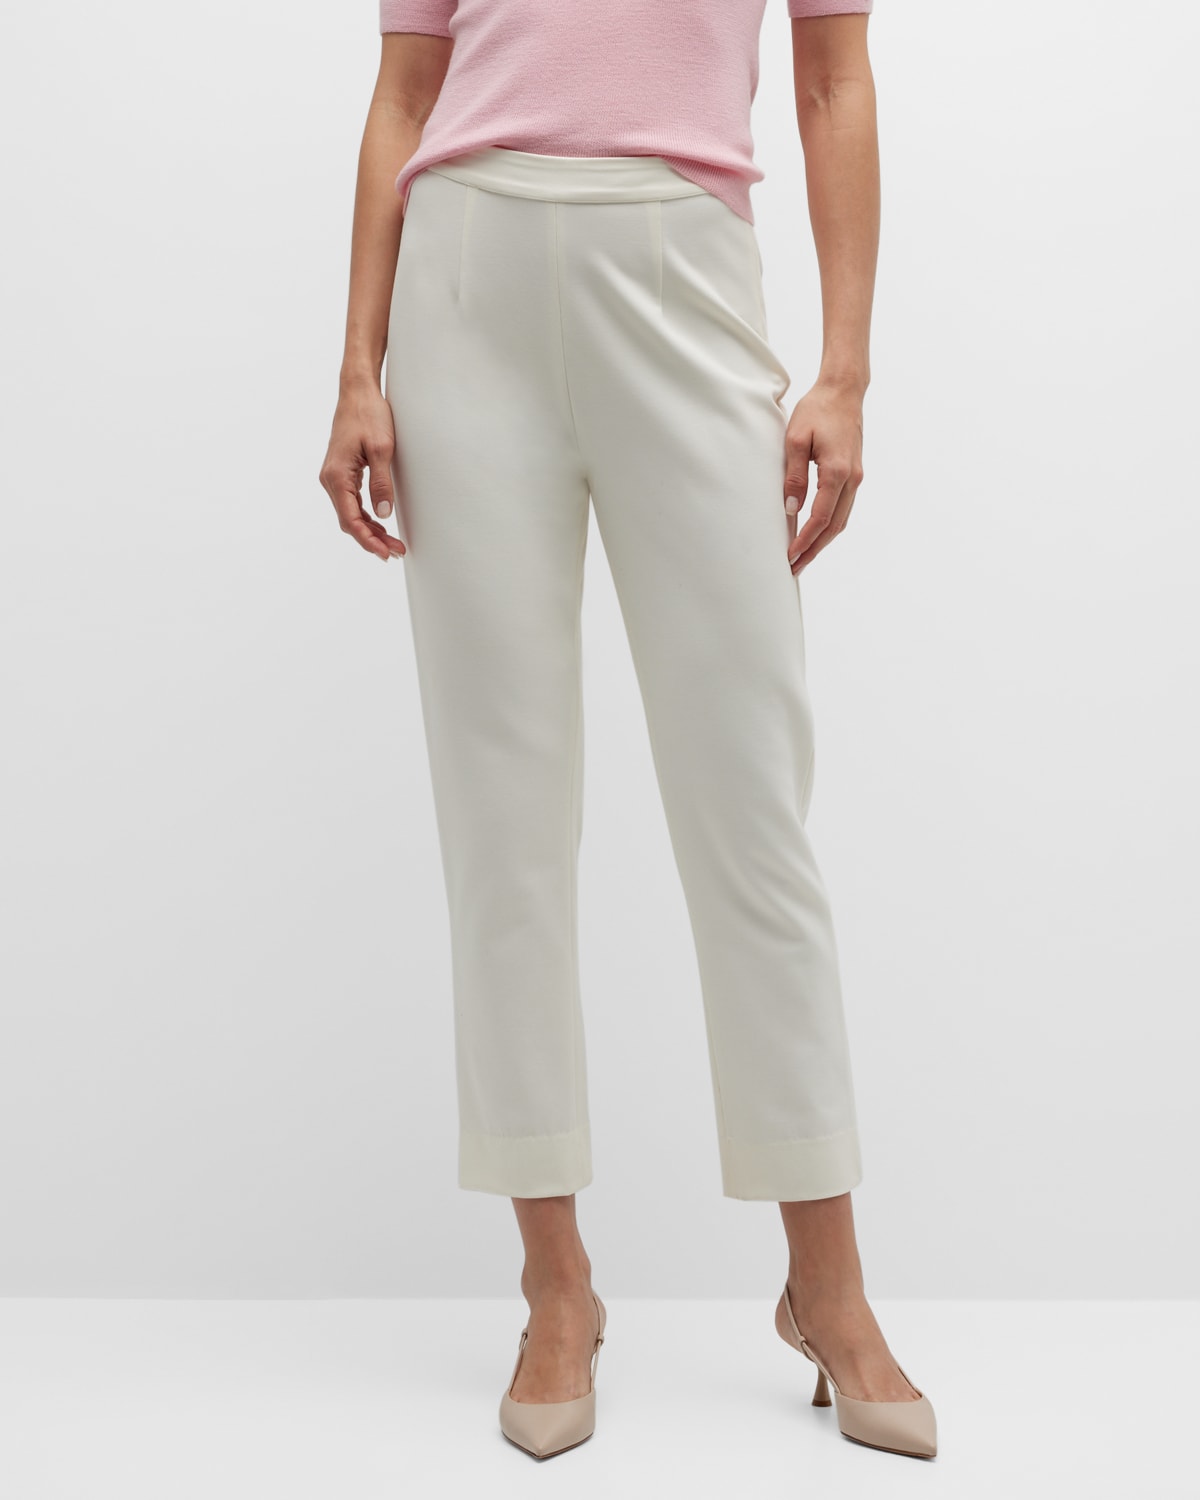 Frances Valentine Lucy Cropped Stretch Straight-Leg Pants